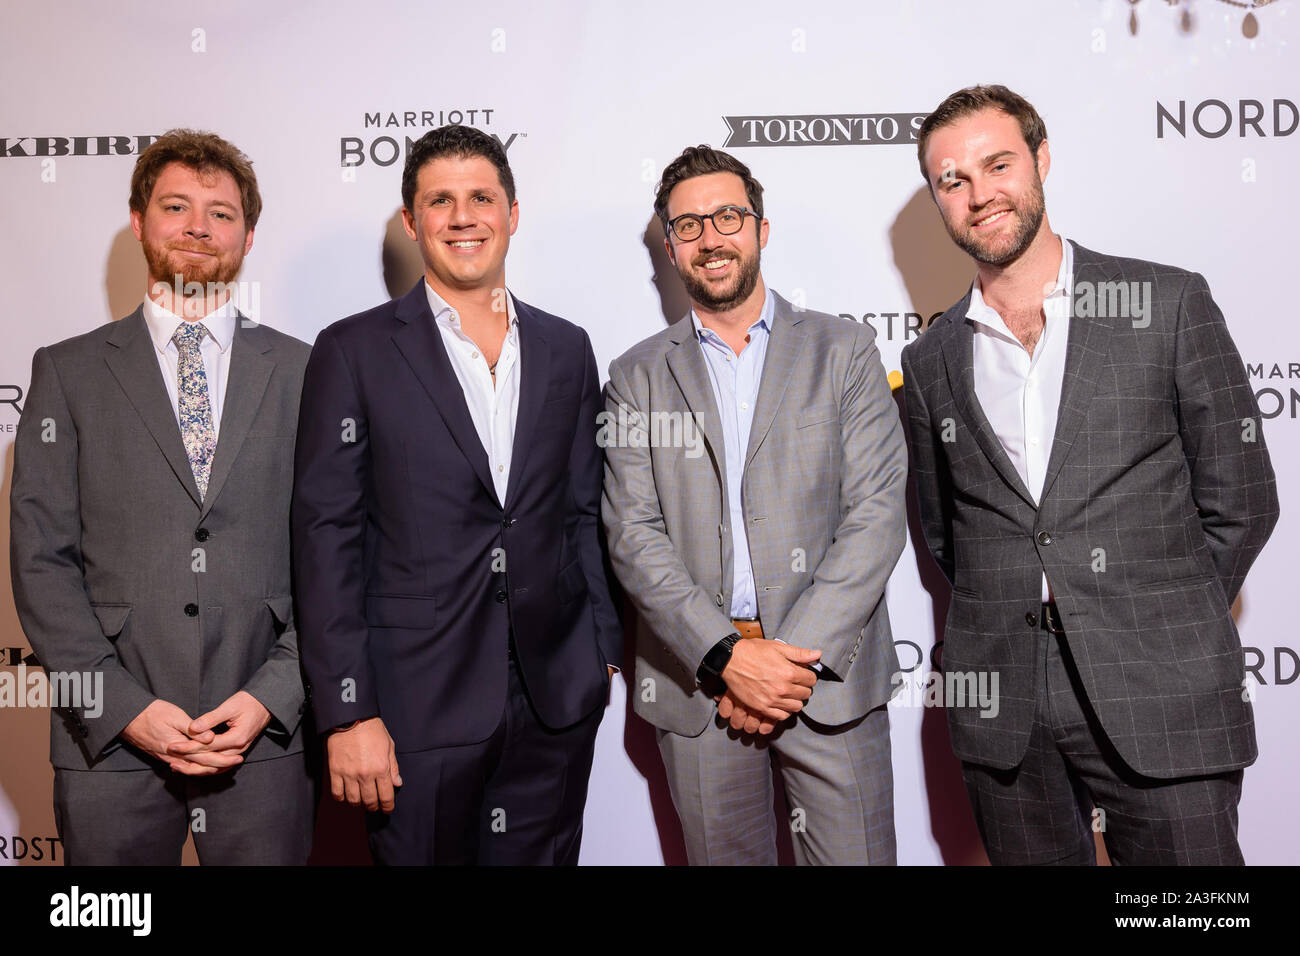 Nordstrom Supper Suite hosts the world premiere party for "Blackbird" at  the Toronto Film Festival Featuring: Tanner Mobley, Jonathan Yunger, JJ  Nugent, Jeffrey Greenstein Where: Toronto, Canada When: 06 Sep 2019 Credit: